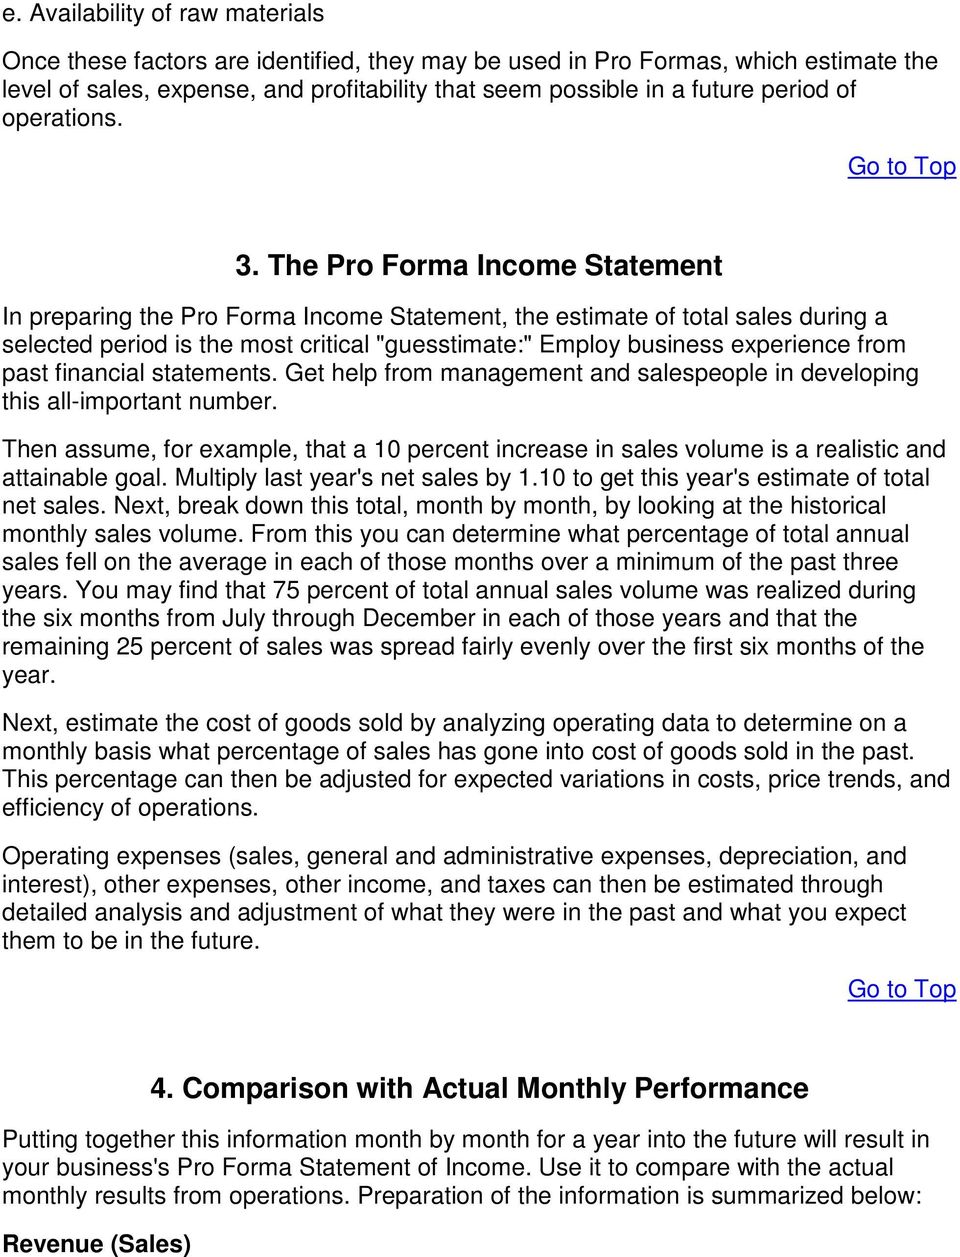 The Pro Forma Income Statement In preparing the Pro Forma Income Statement, the estimate of total sales during a selected period is the most critical "guesstimate:" Employ business experience from